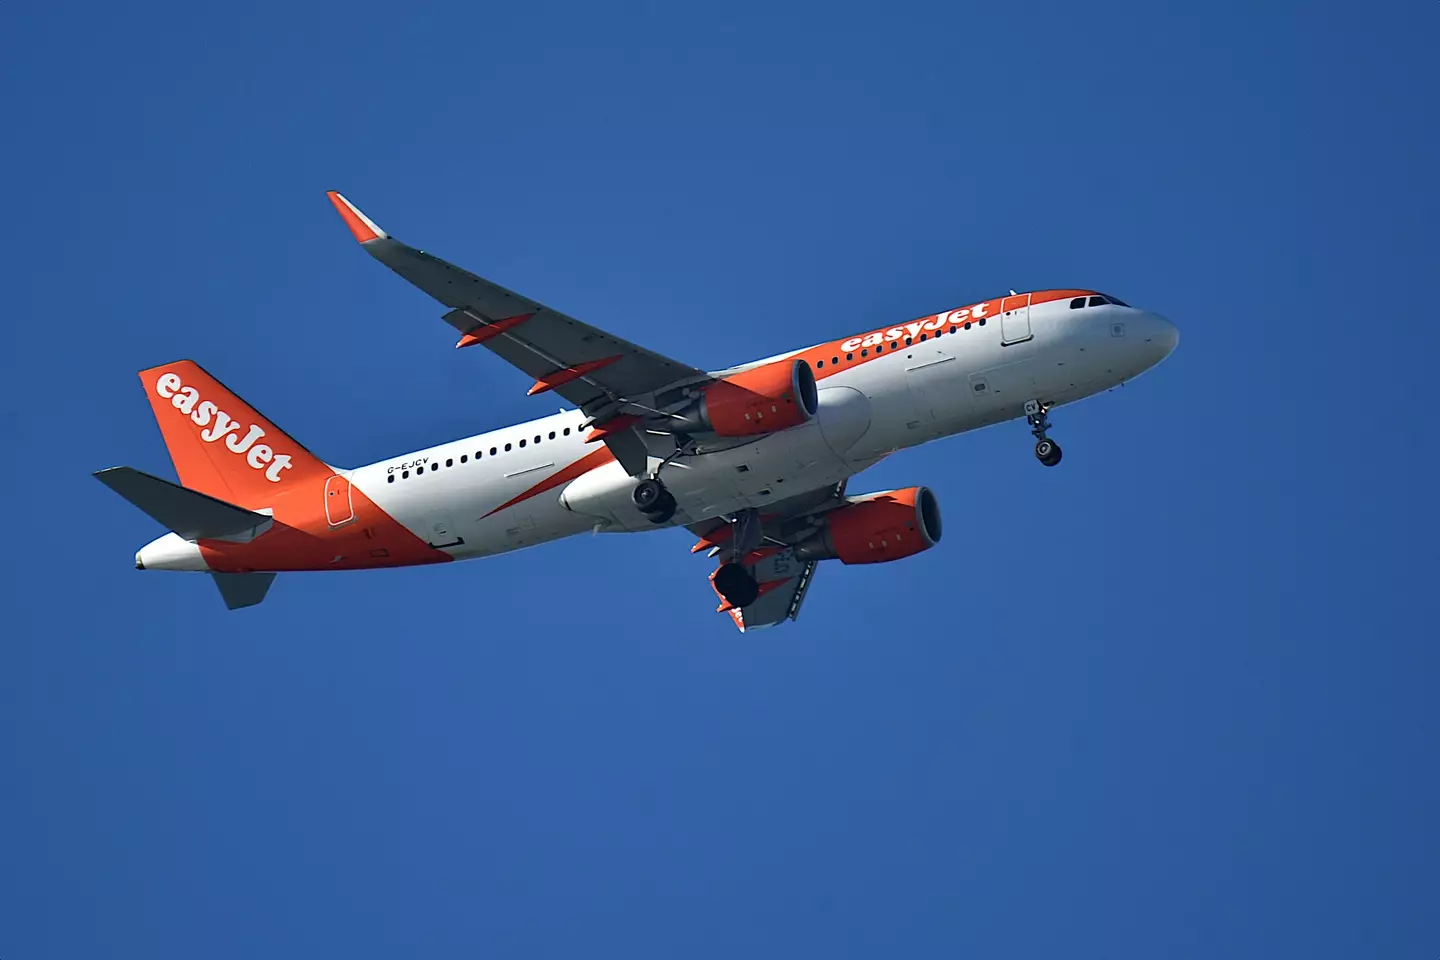 A few easyJet holidaymakers can take a grandparent abroad with them for free with a new offer.